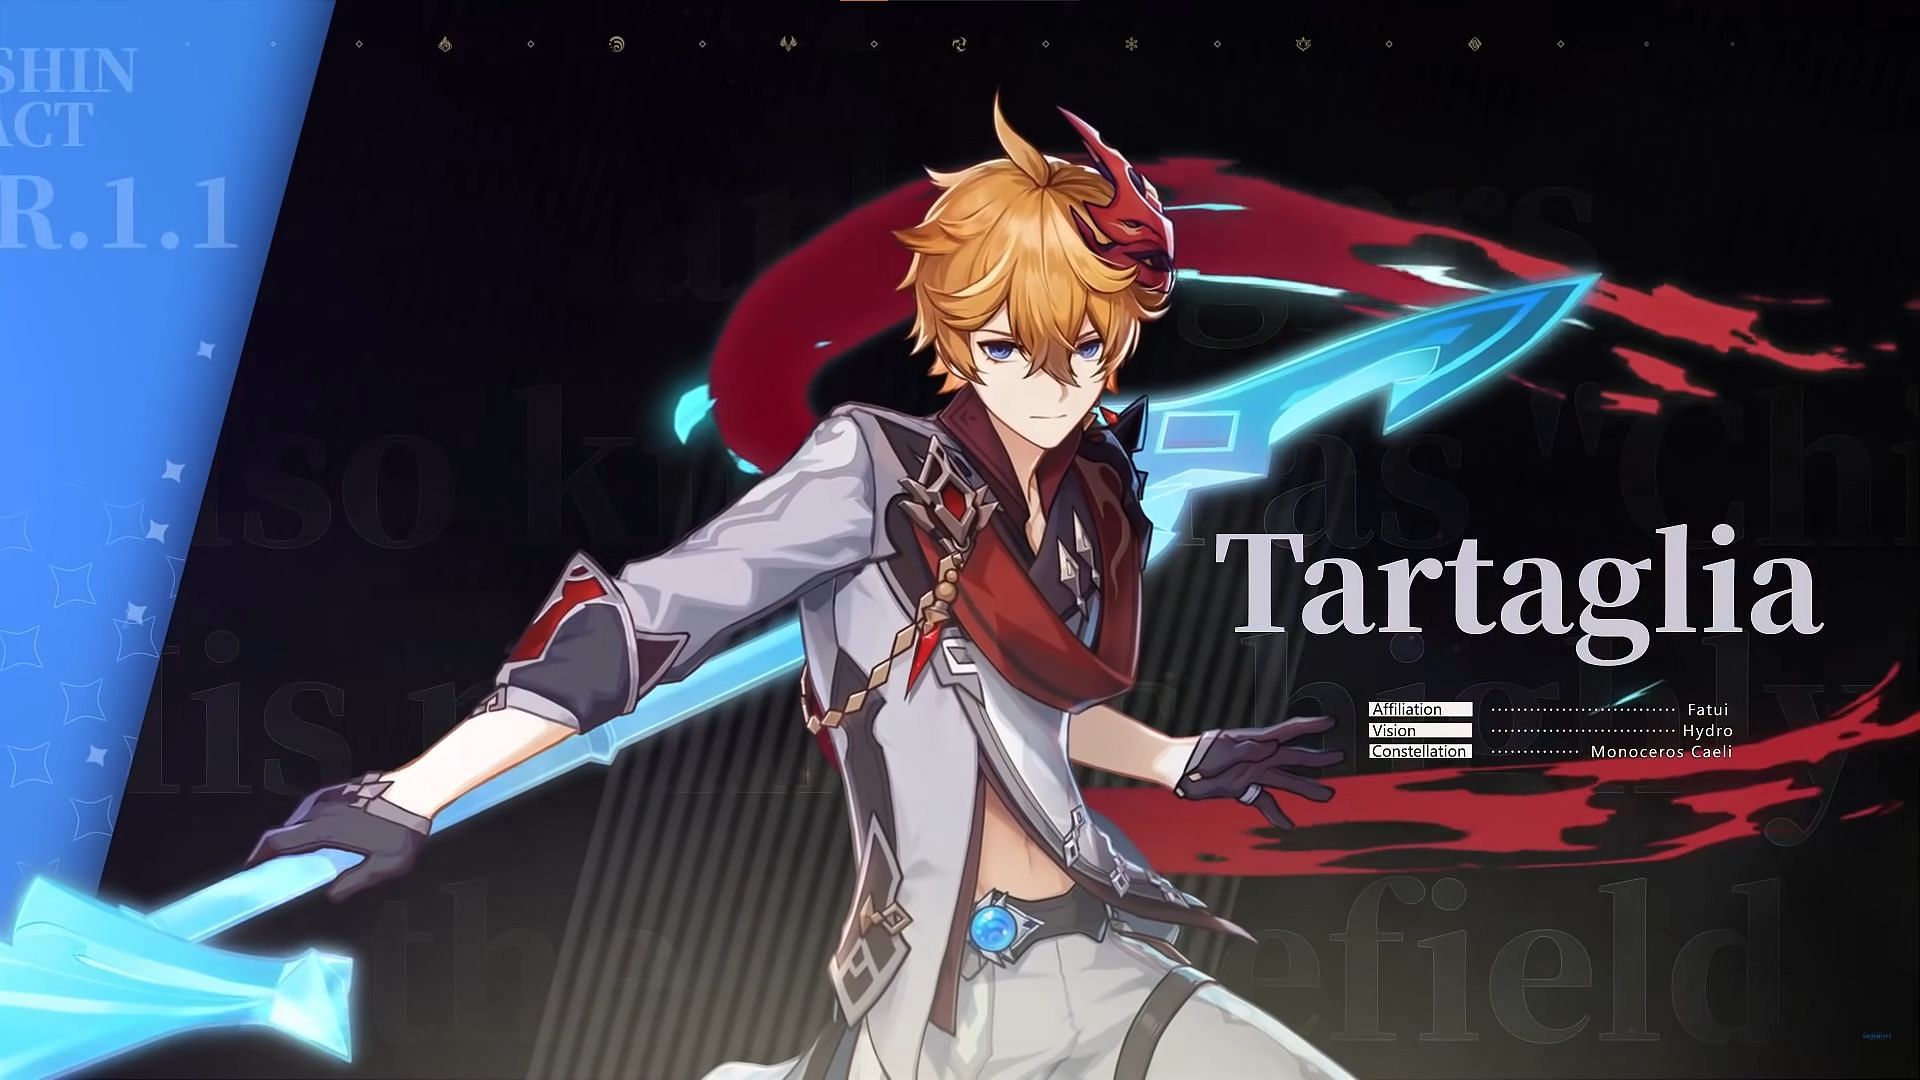 Tartaglia is getting his 4th banner in the game (Image via HoYoverse)